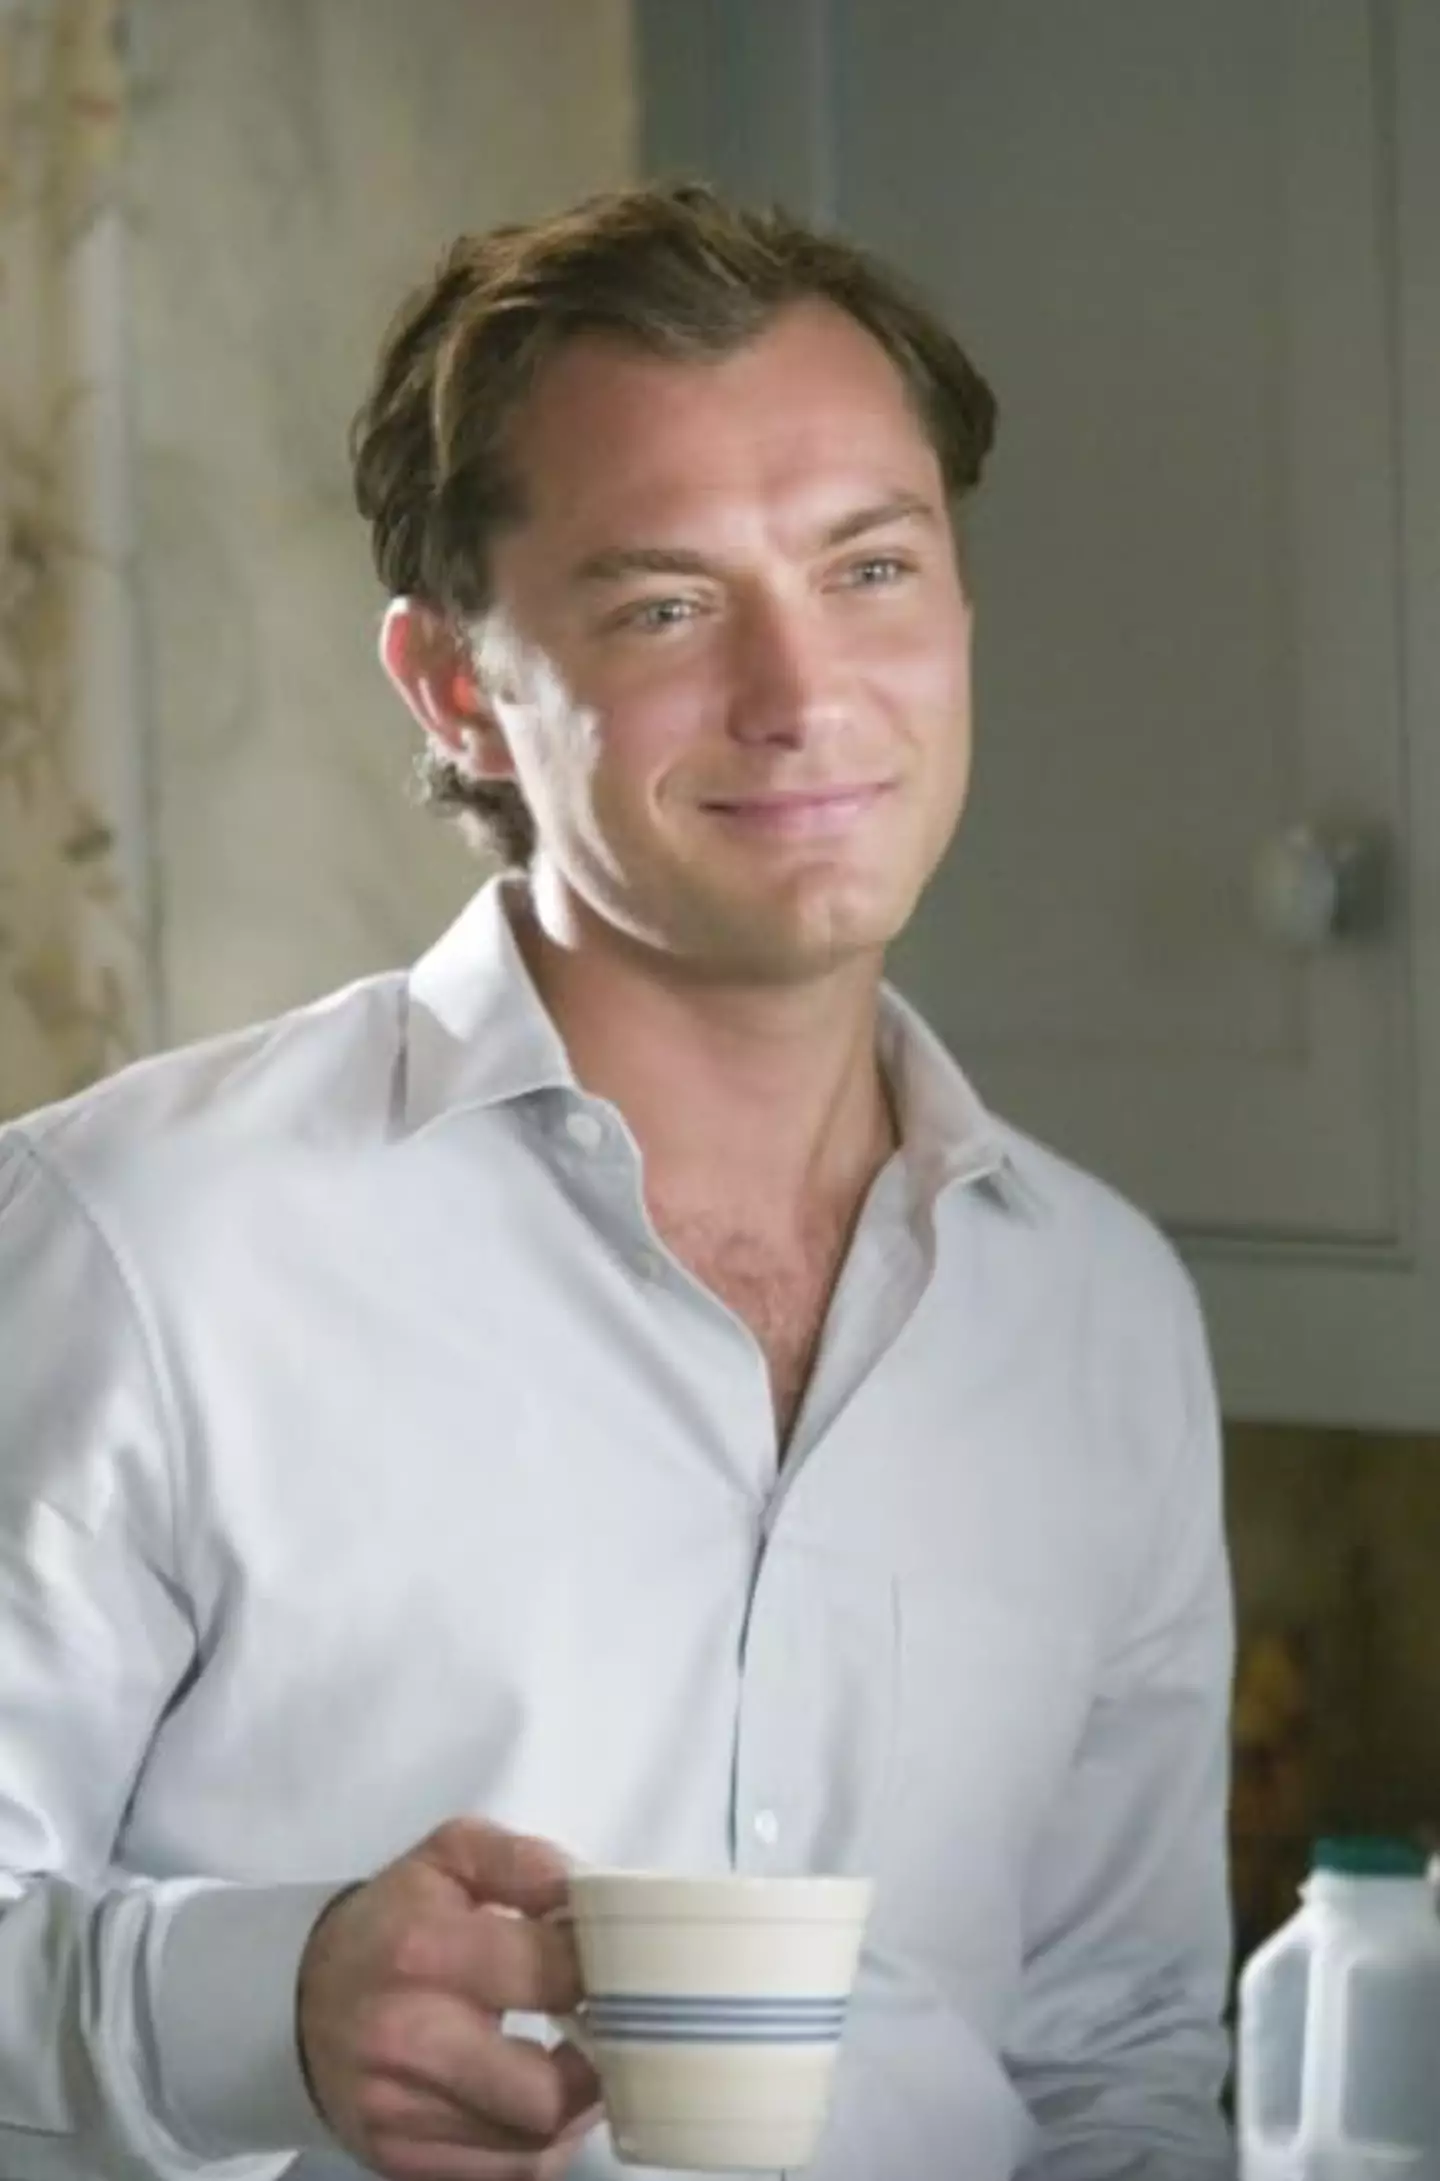 Jude Law's character is believed to be an attempted murderer.